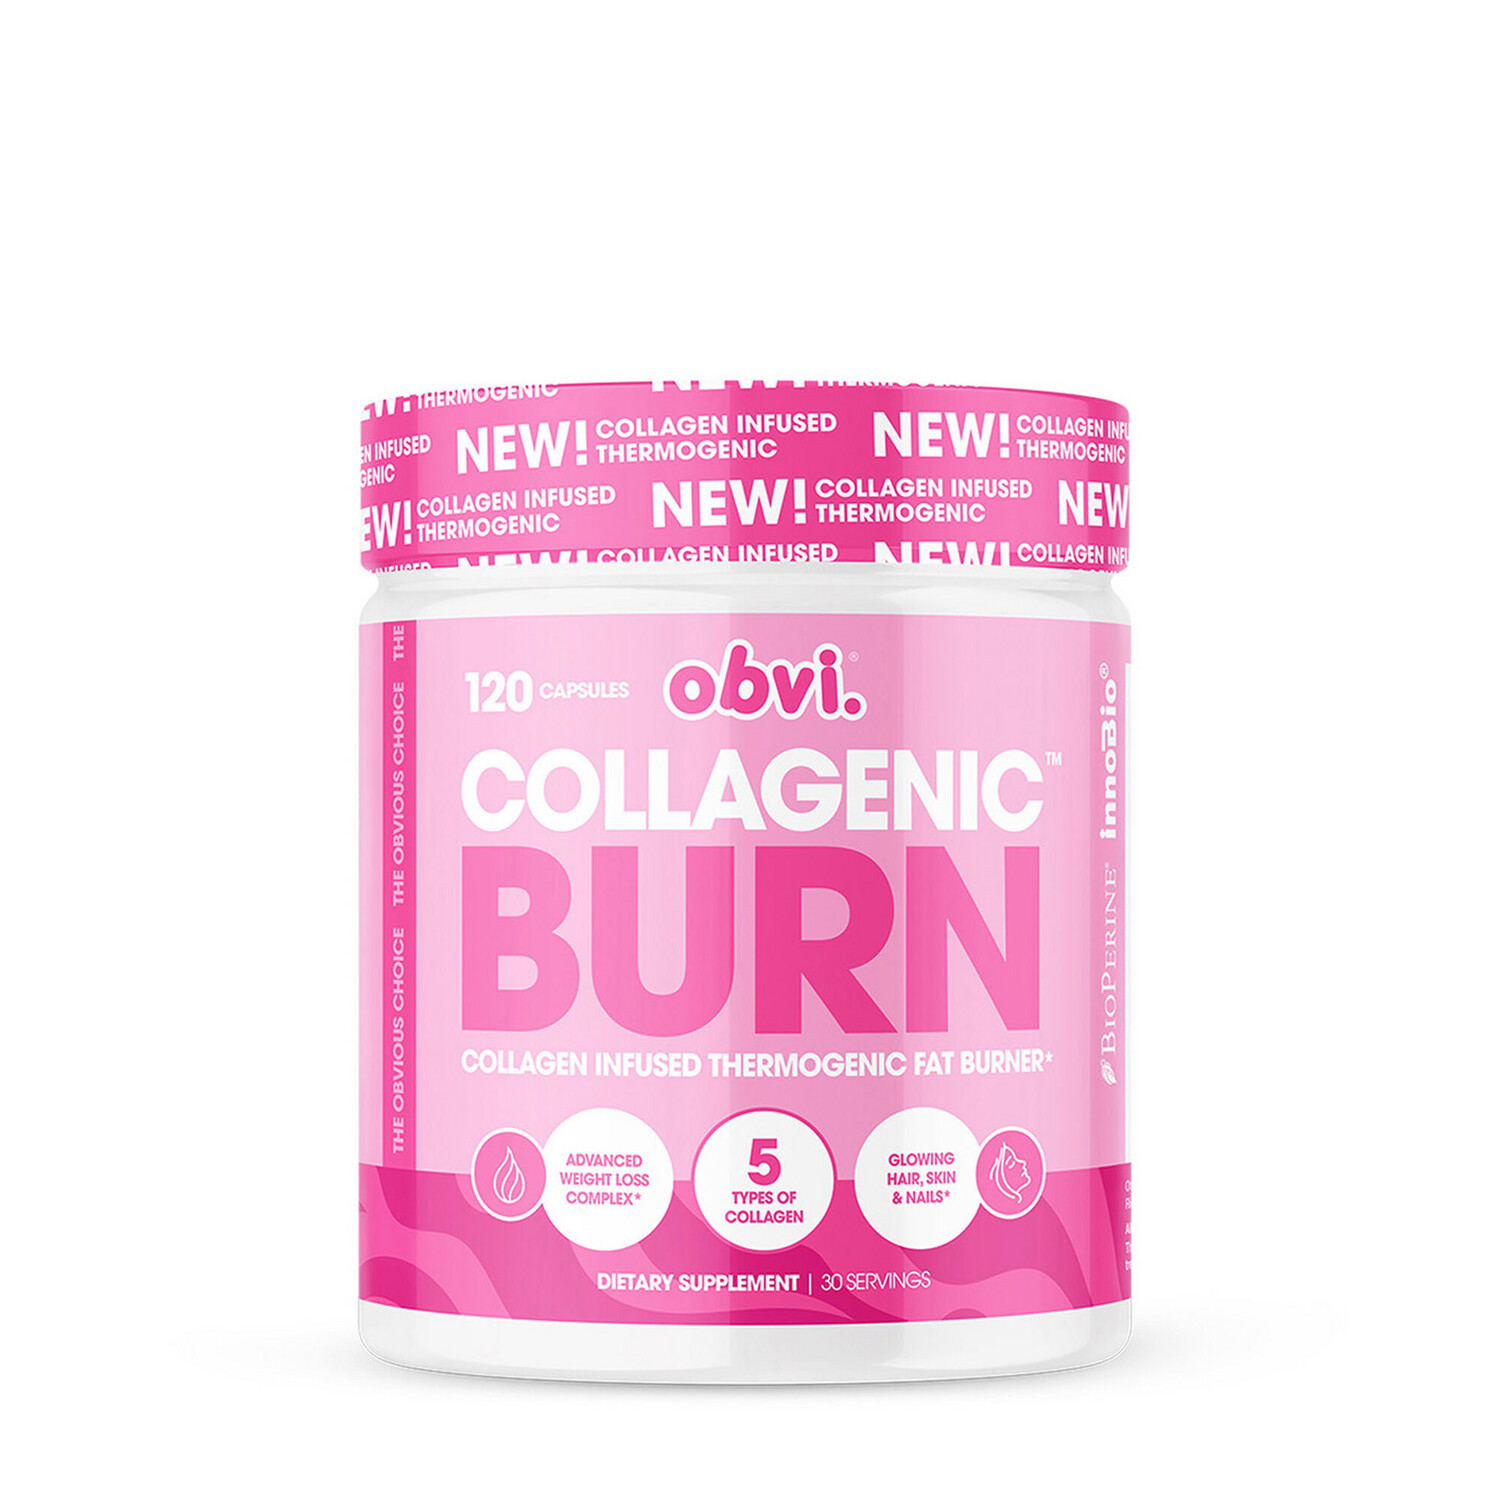 obvi® Collagen Burn A Collagen Infused Thermogenic